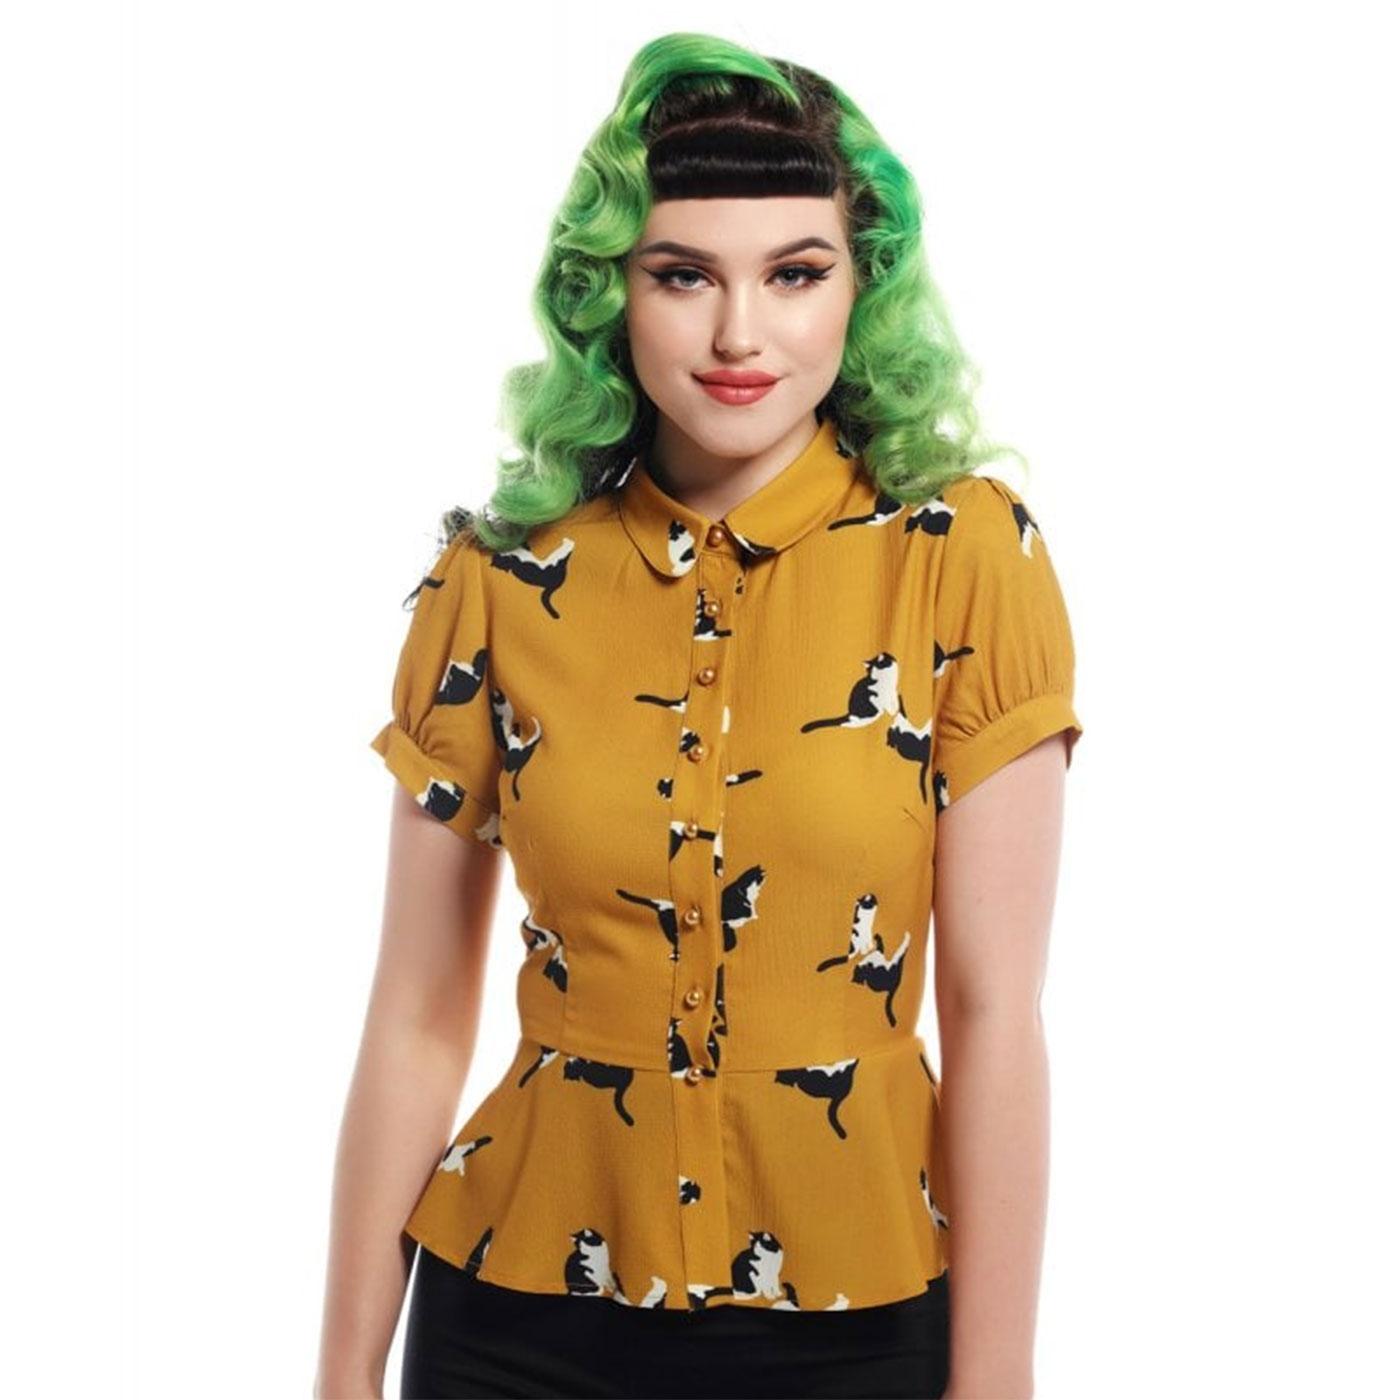 Mary Grace COLLECTIF Retro 50s Kitty Print Shirt